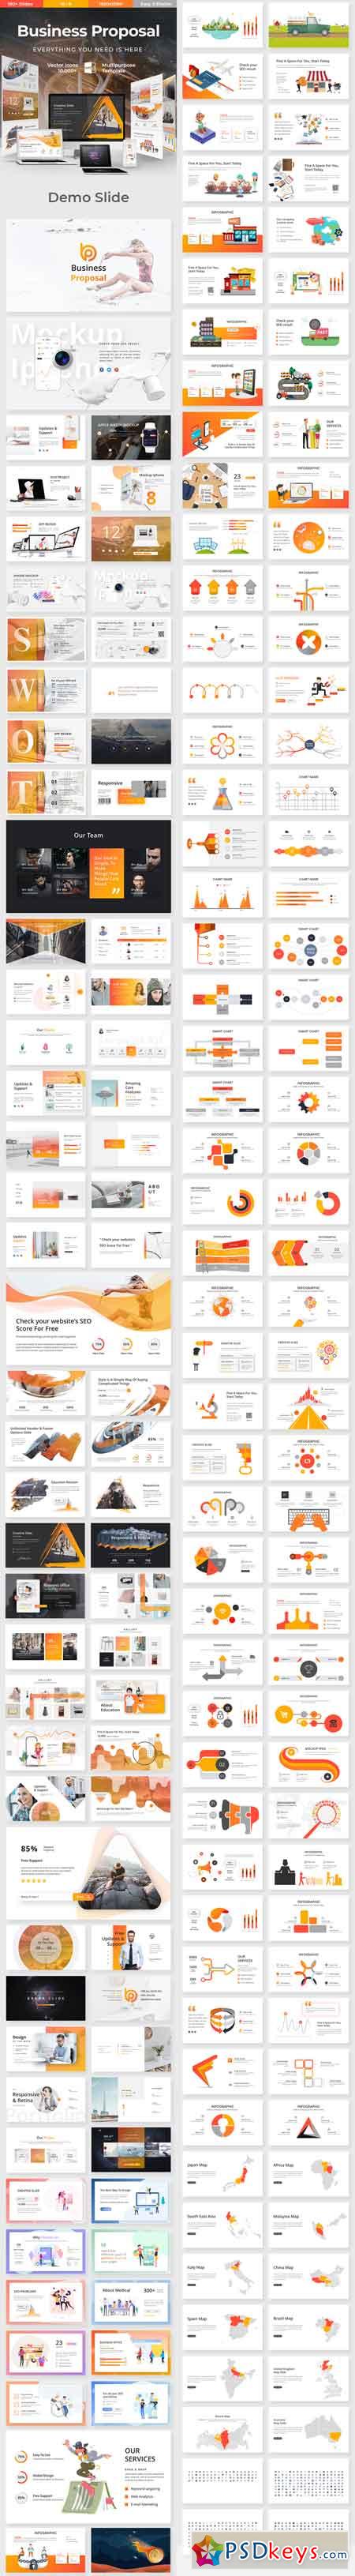 Business Proposal Powerpoint Template 22604356